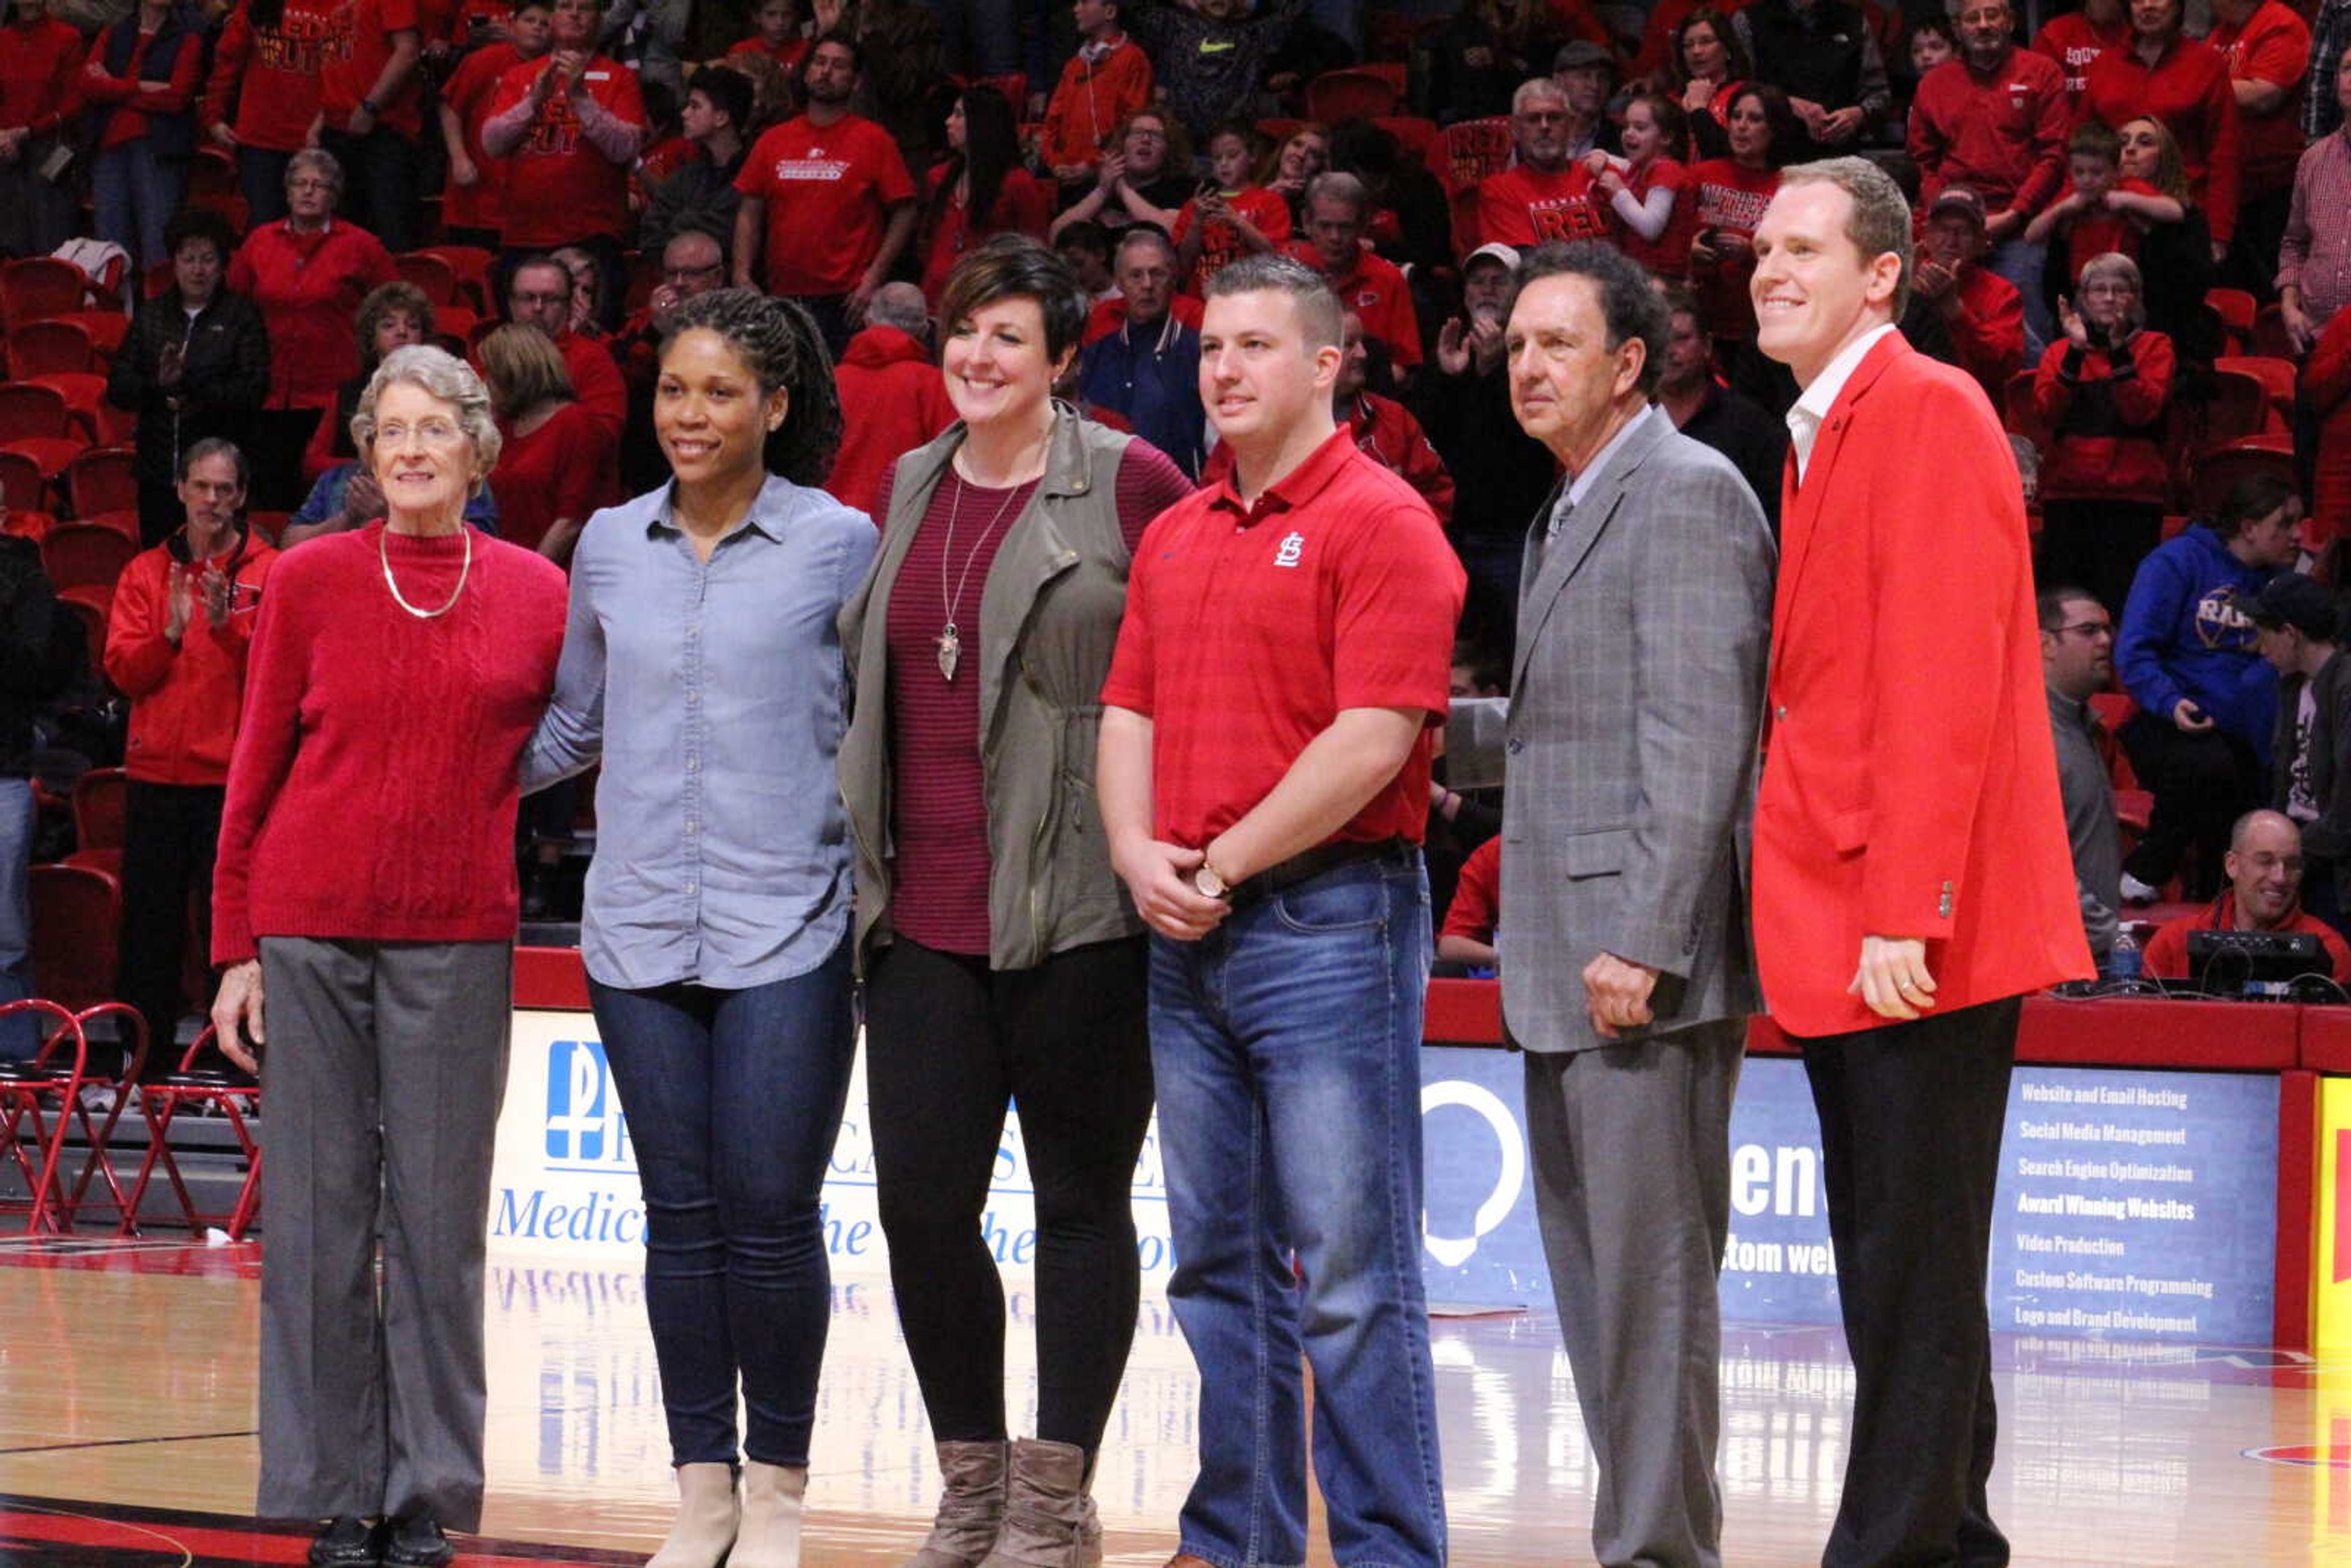 Southeast Missouri State's newest inductees to the Hall of Fame were announced at halftime of the Southeast men's basketball game Saturday Feb. 4. Left to right, Judy Holcomb (Friends of the Redhawks), Heather Jenkins (Track & Field, 2002-2006), Lea Nenninger (Volleyball, 1998-2000), Jim Klocke (Baseball, 2007-2010) and Ron Shumate (Men's Basketball Coach, 1981-1997). Also inducted and unable to make the game was Eddie Moss (Football, 1970-1971).